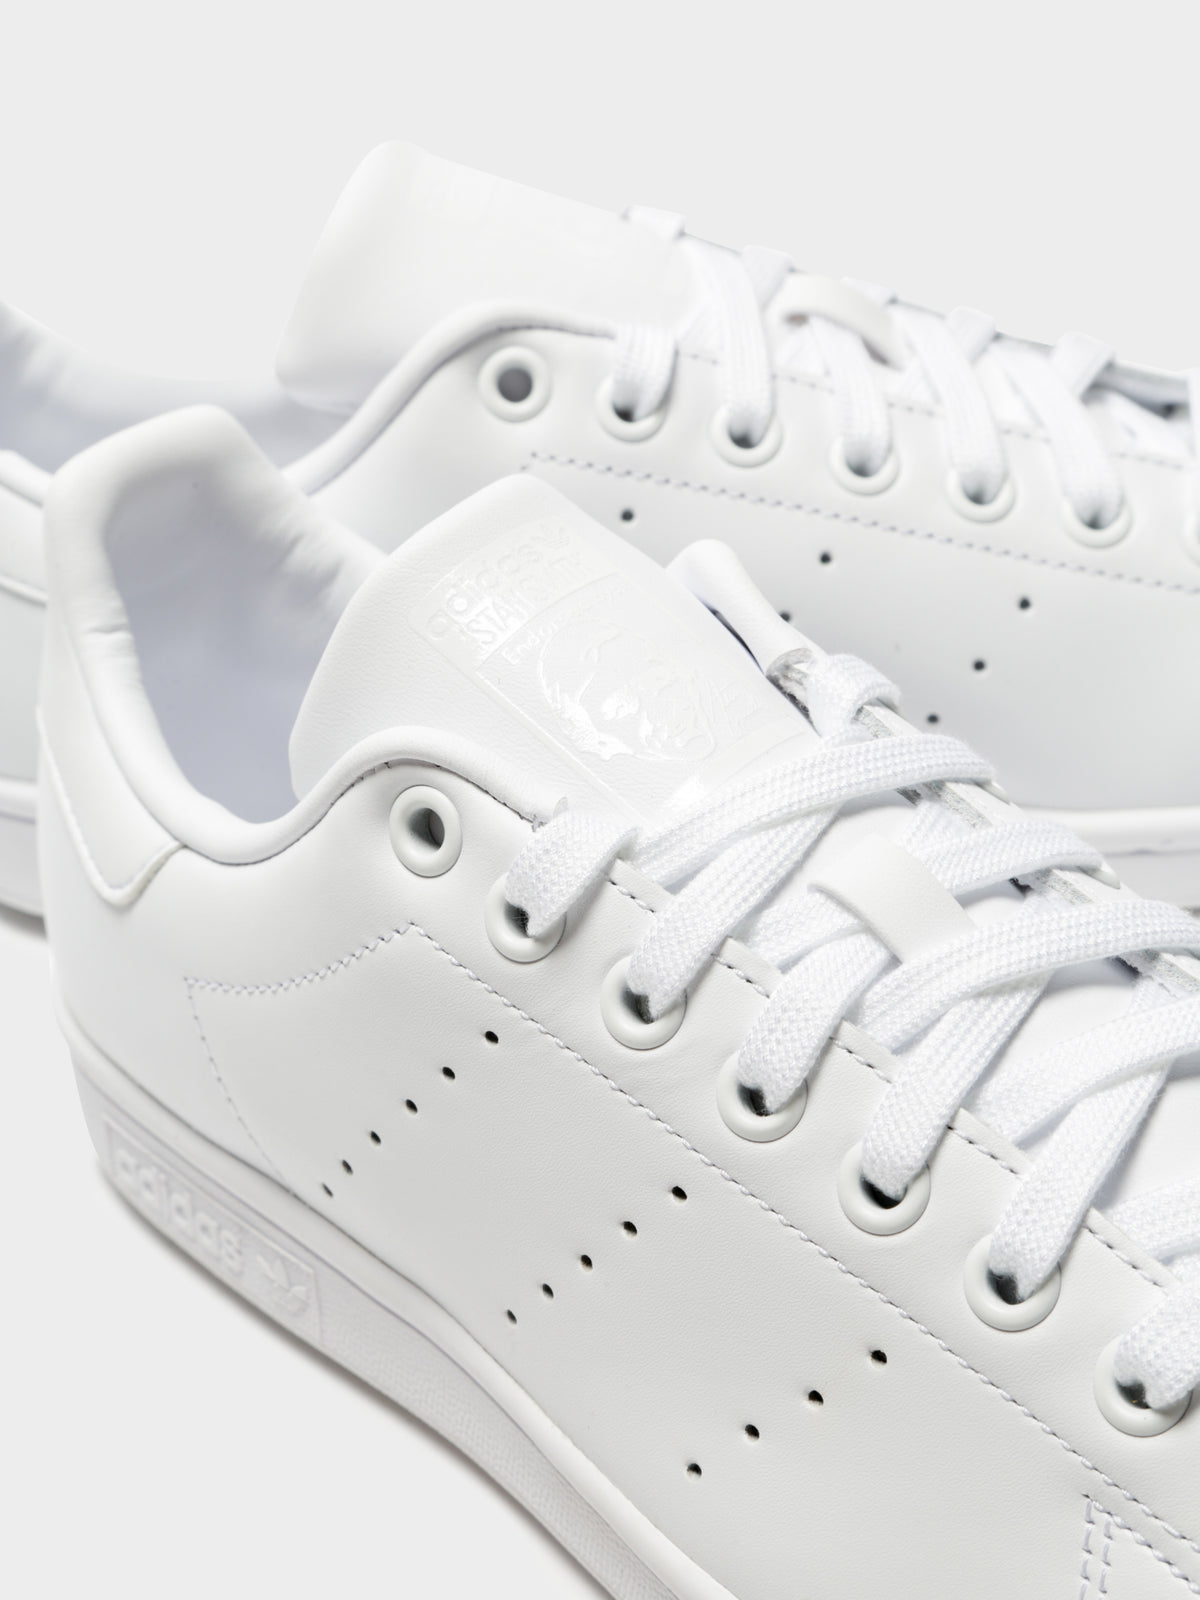 Unisex Stan Smith Sneakers in White